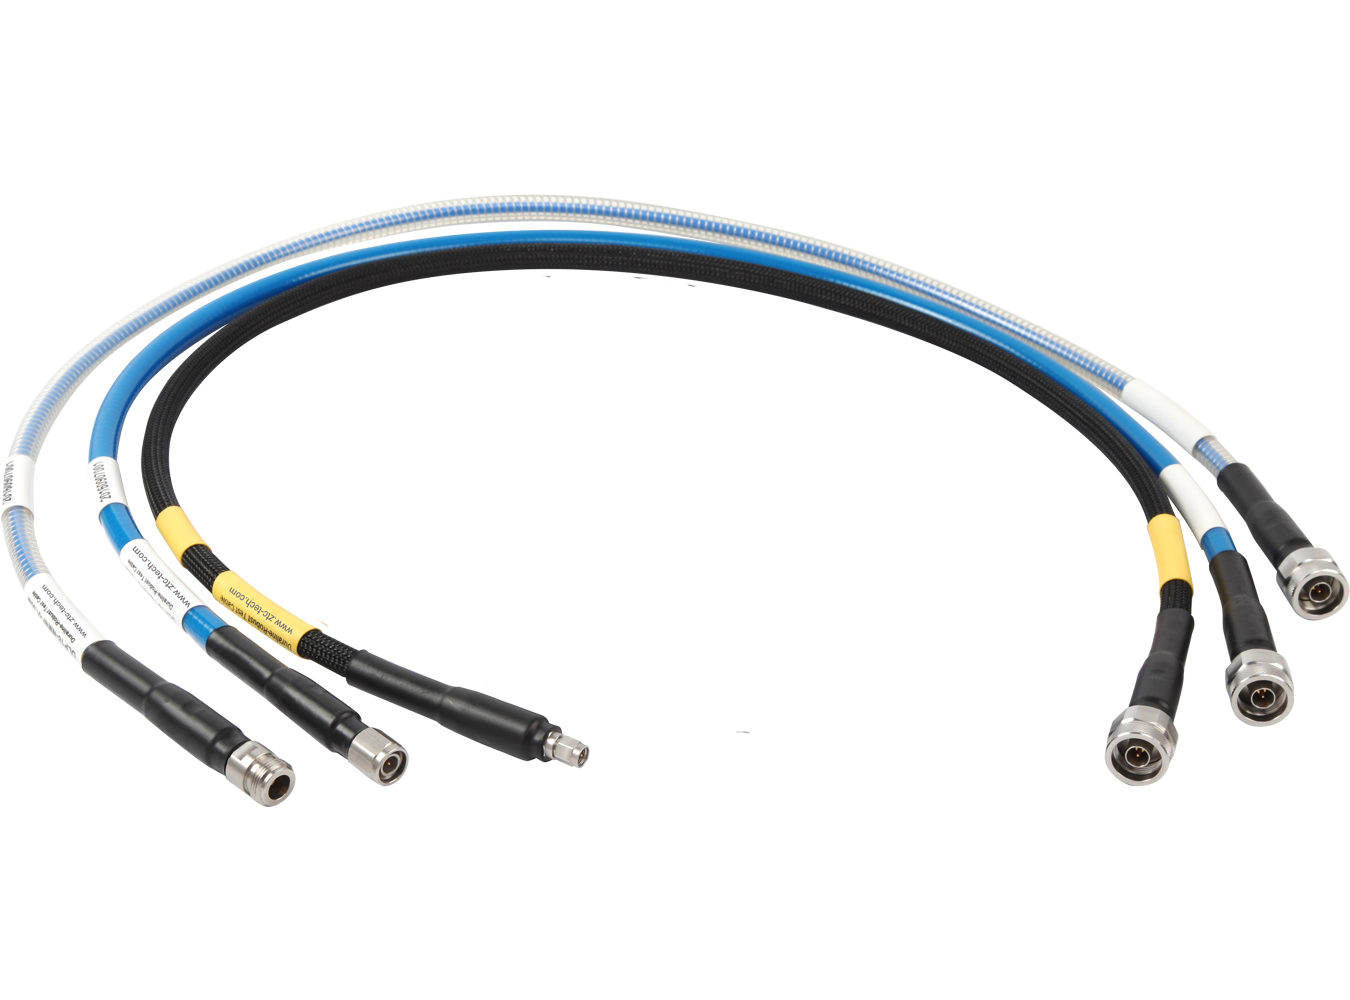  How to choose the best rf test cable(1)?